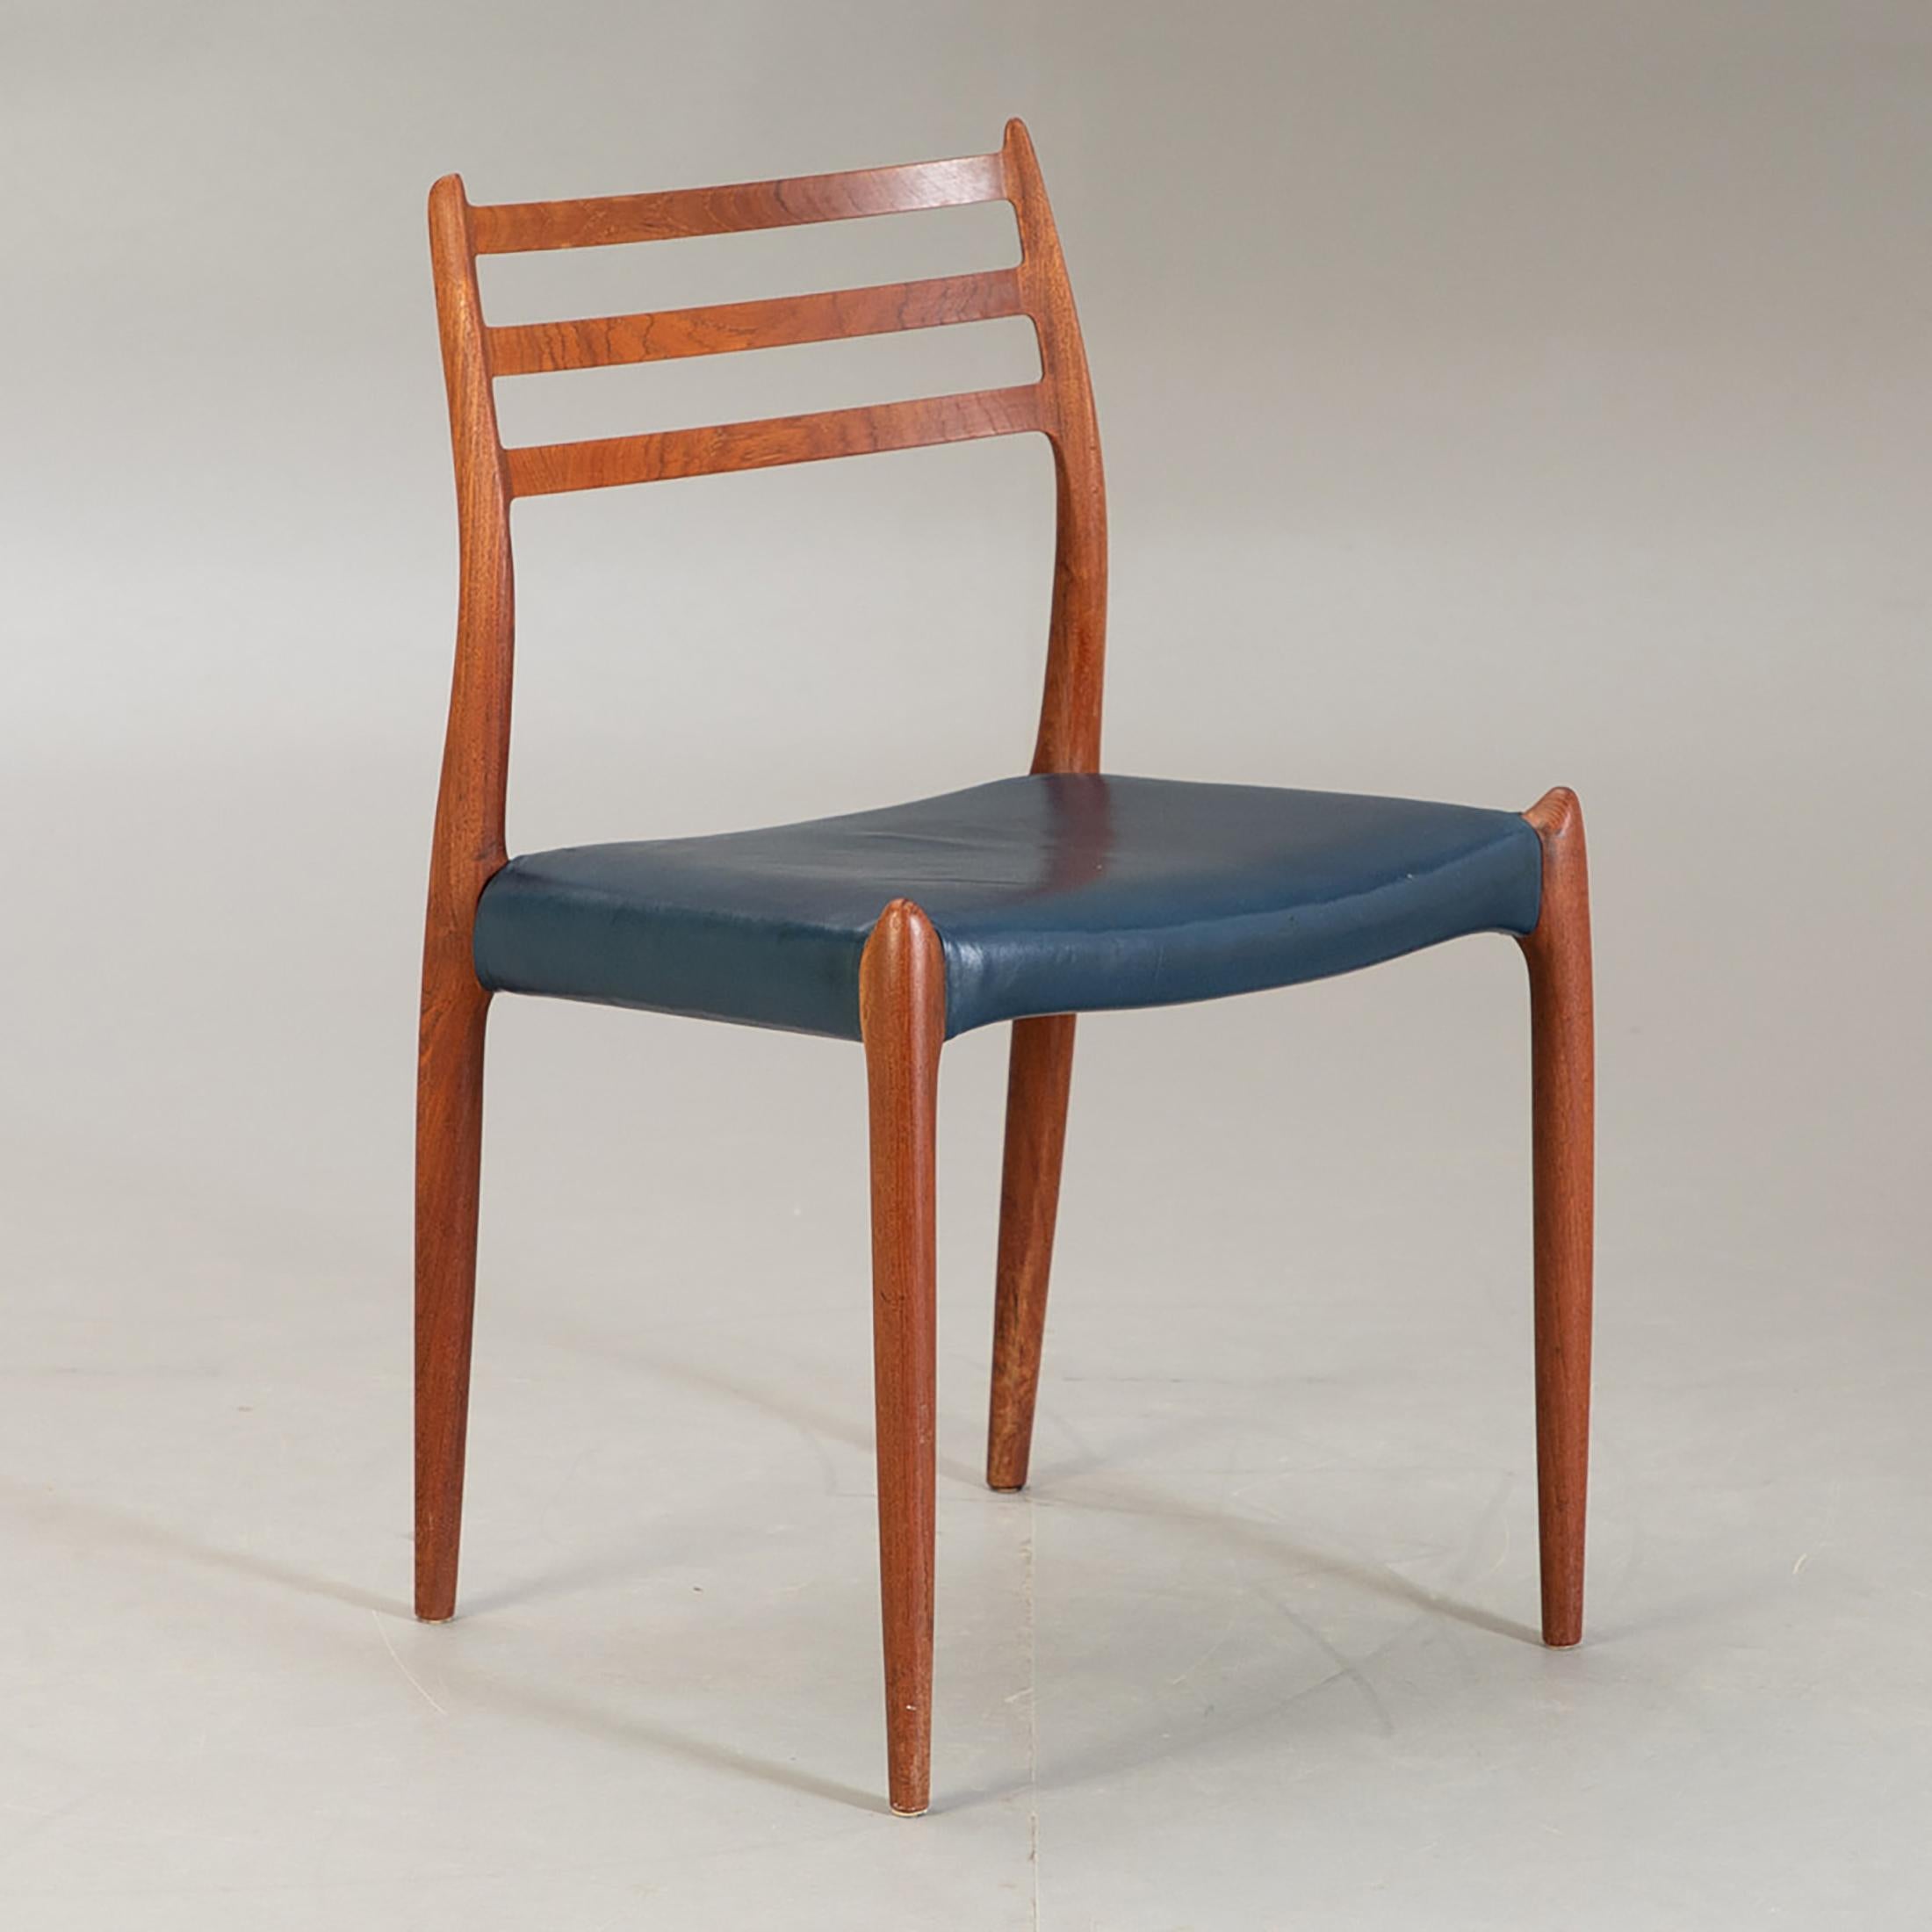 Dining chairs made of solid hardwood, designed in the 1950s by Niels Otto Møller and produced by J. L. Møller Møbelfabrik, model number 78. Original condition. Delivery time about 1-2 weeks. New upholstery on request possible.

 